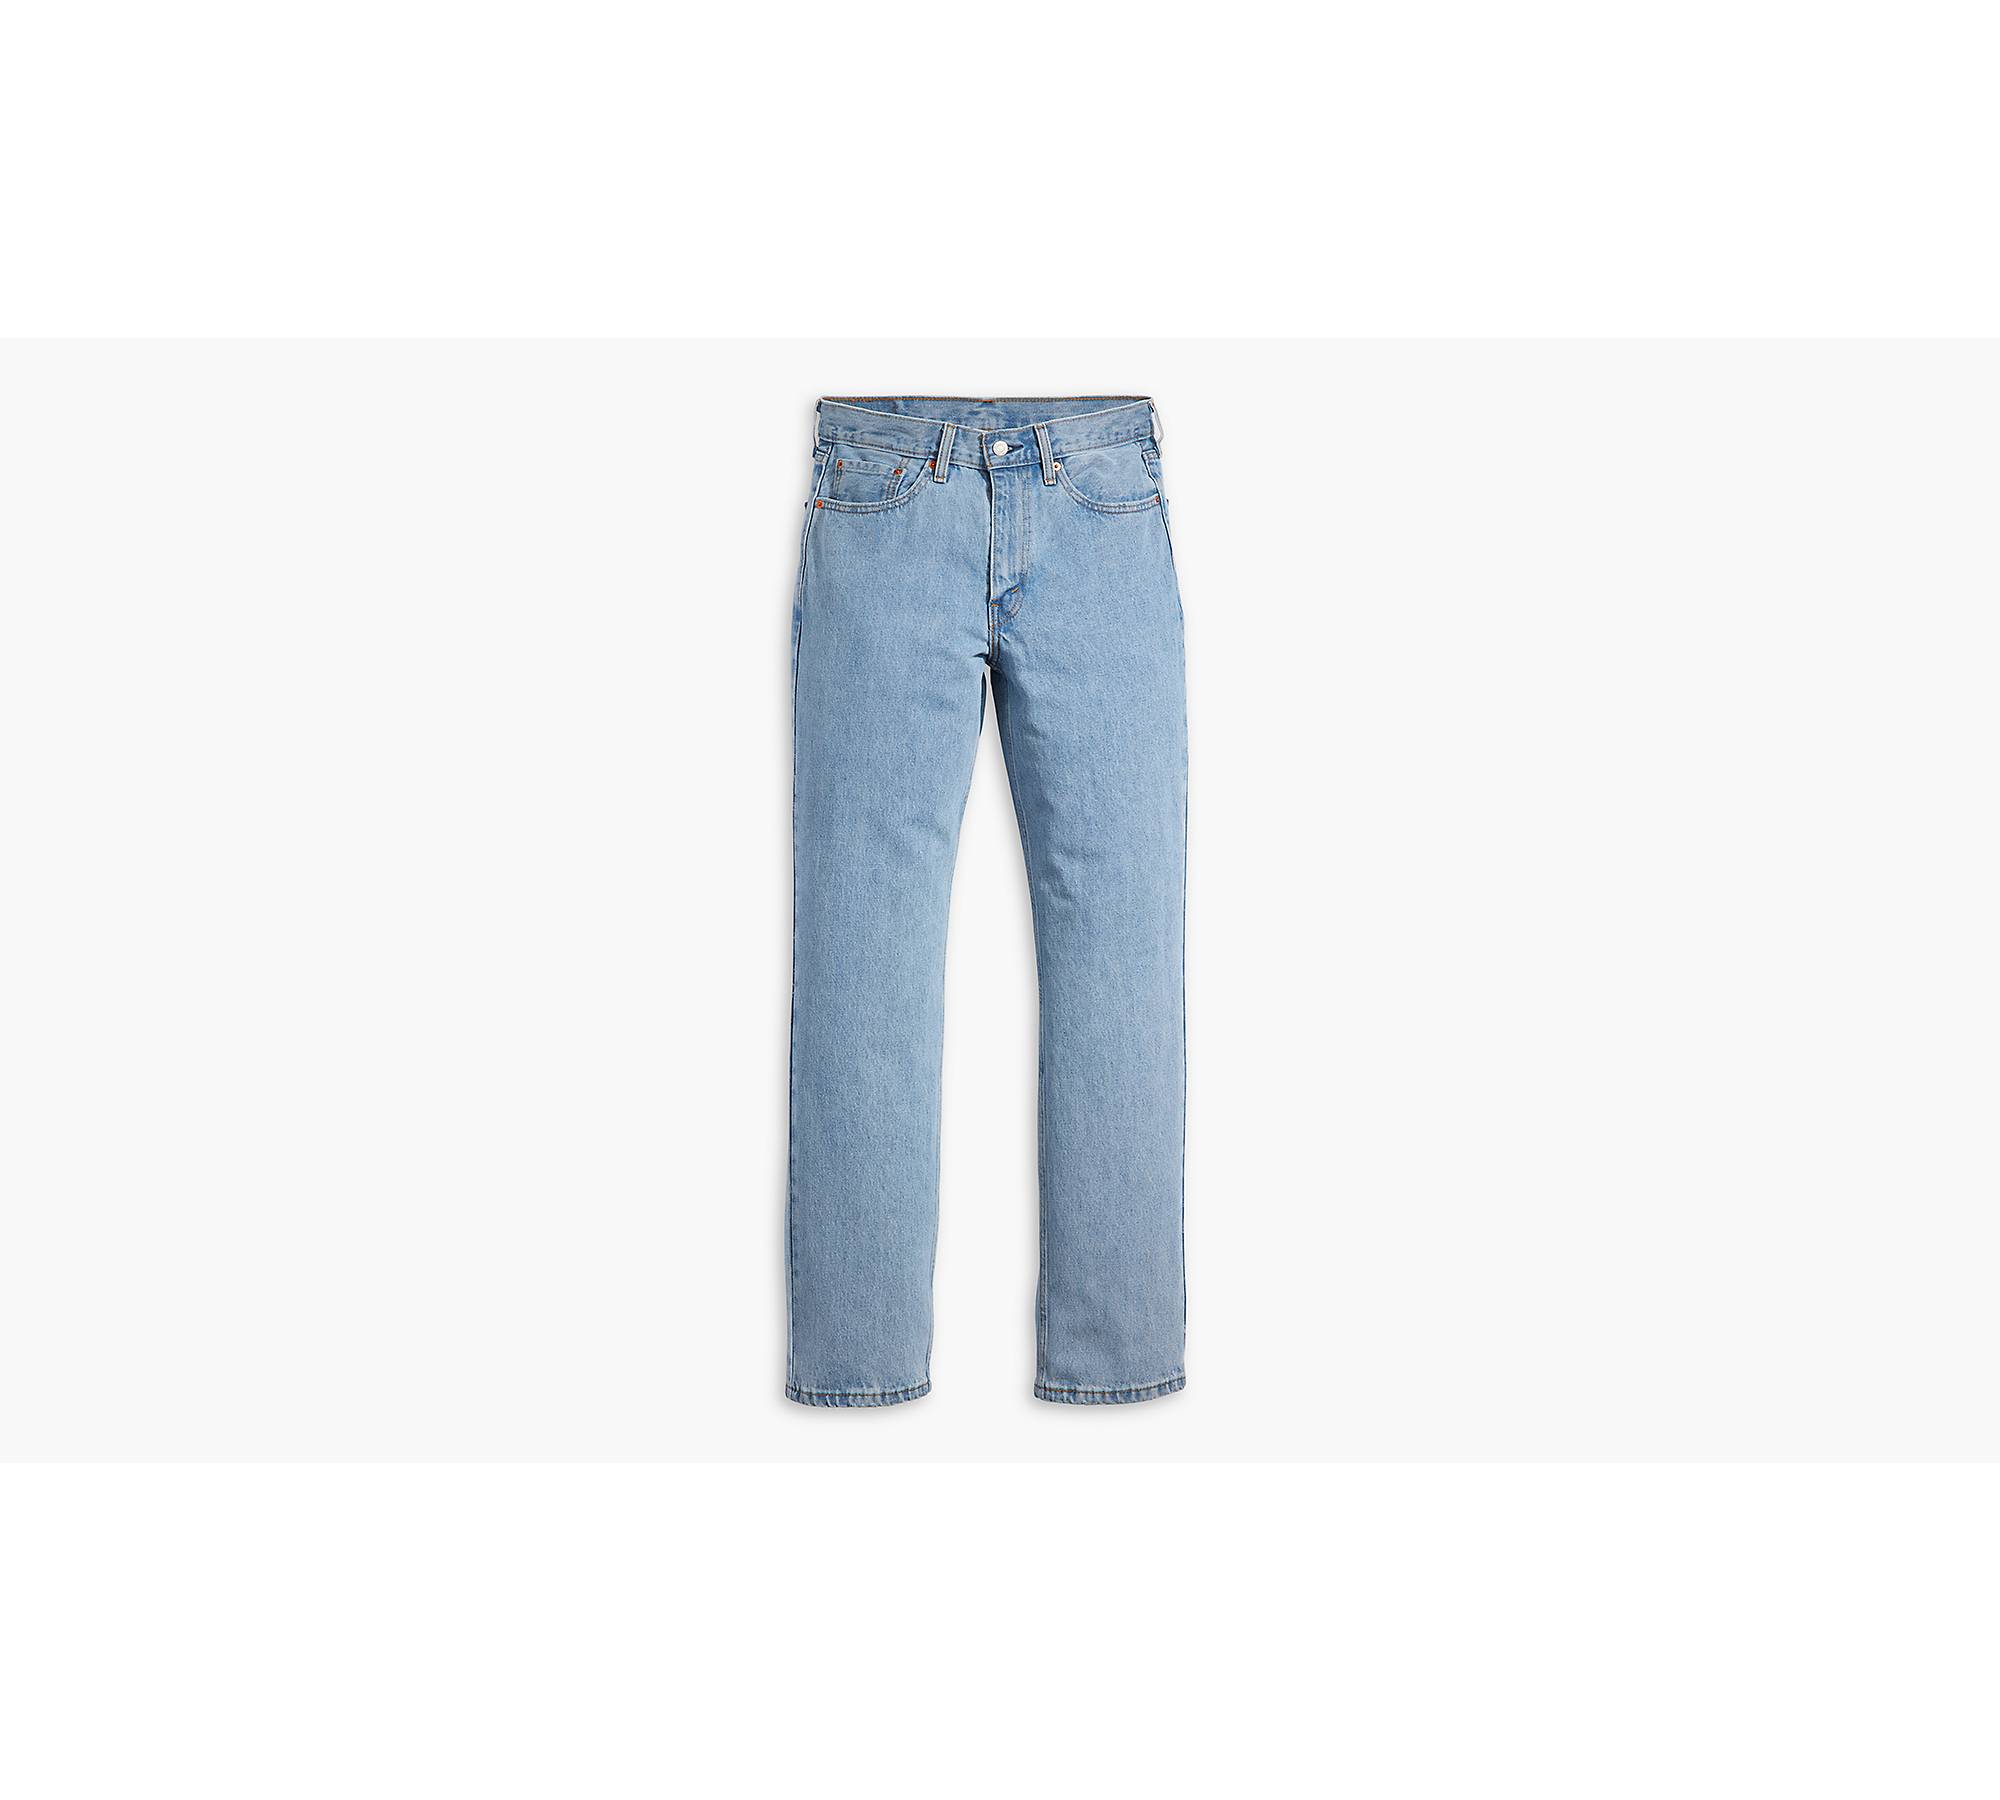 Relaxed Fit 5-Pocket Jean - Bleach Stone Wash